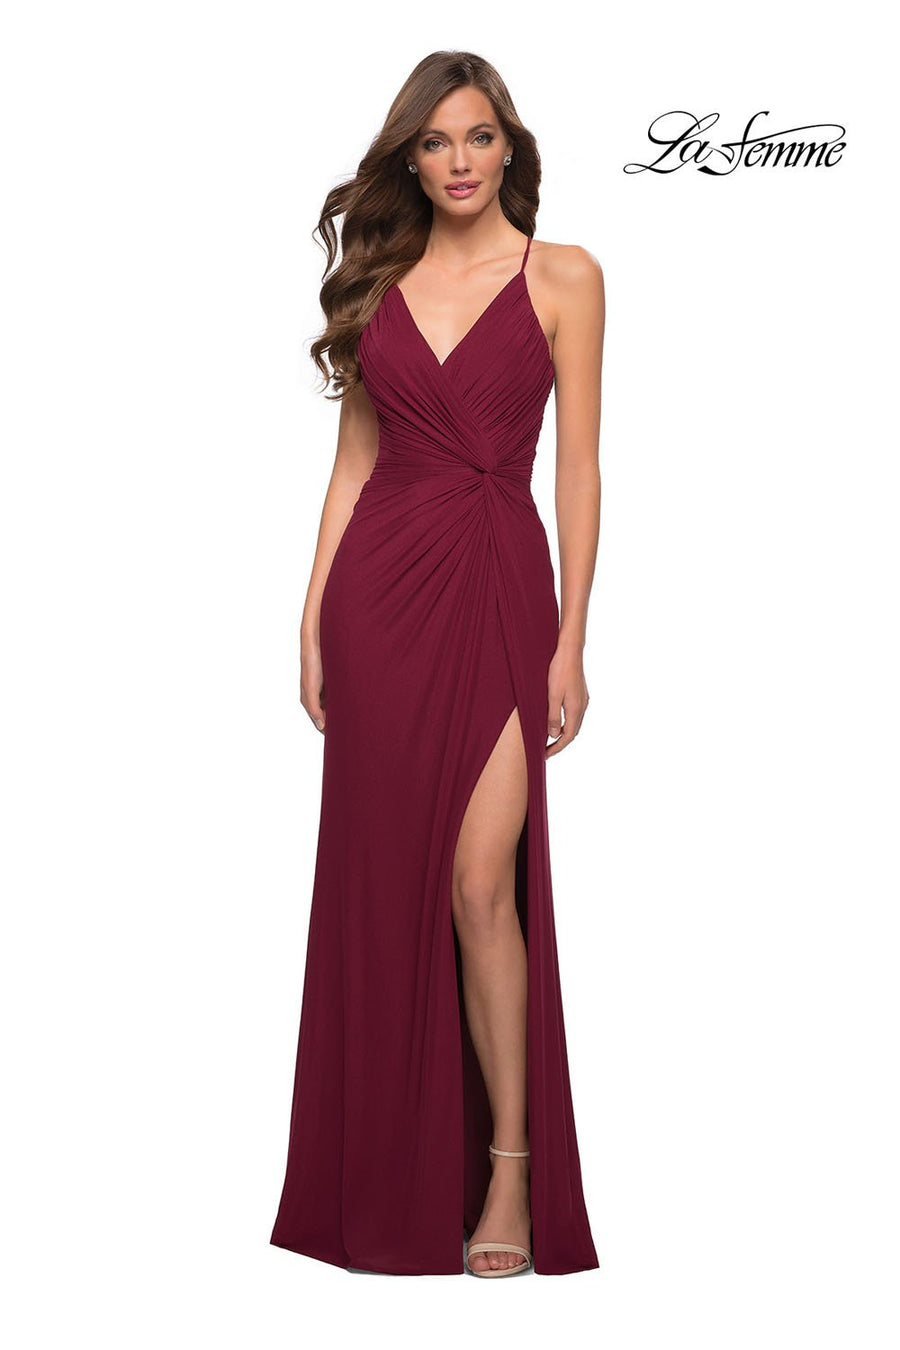 La Femme 29624 prom dress images.  La Femme 29624 is available in these colors: Black, Wine.